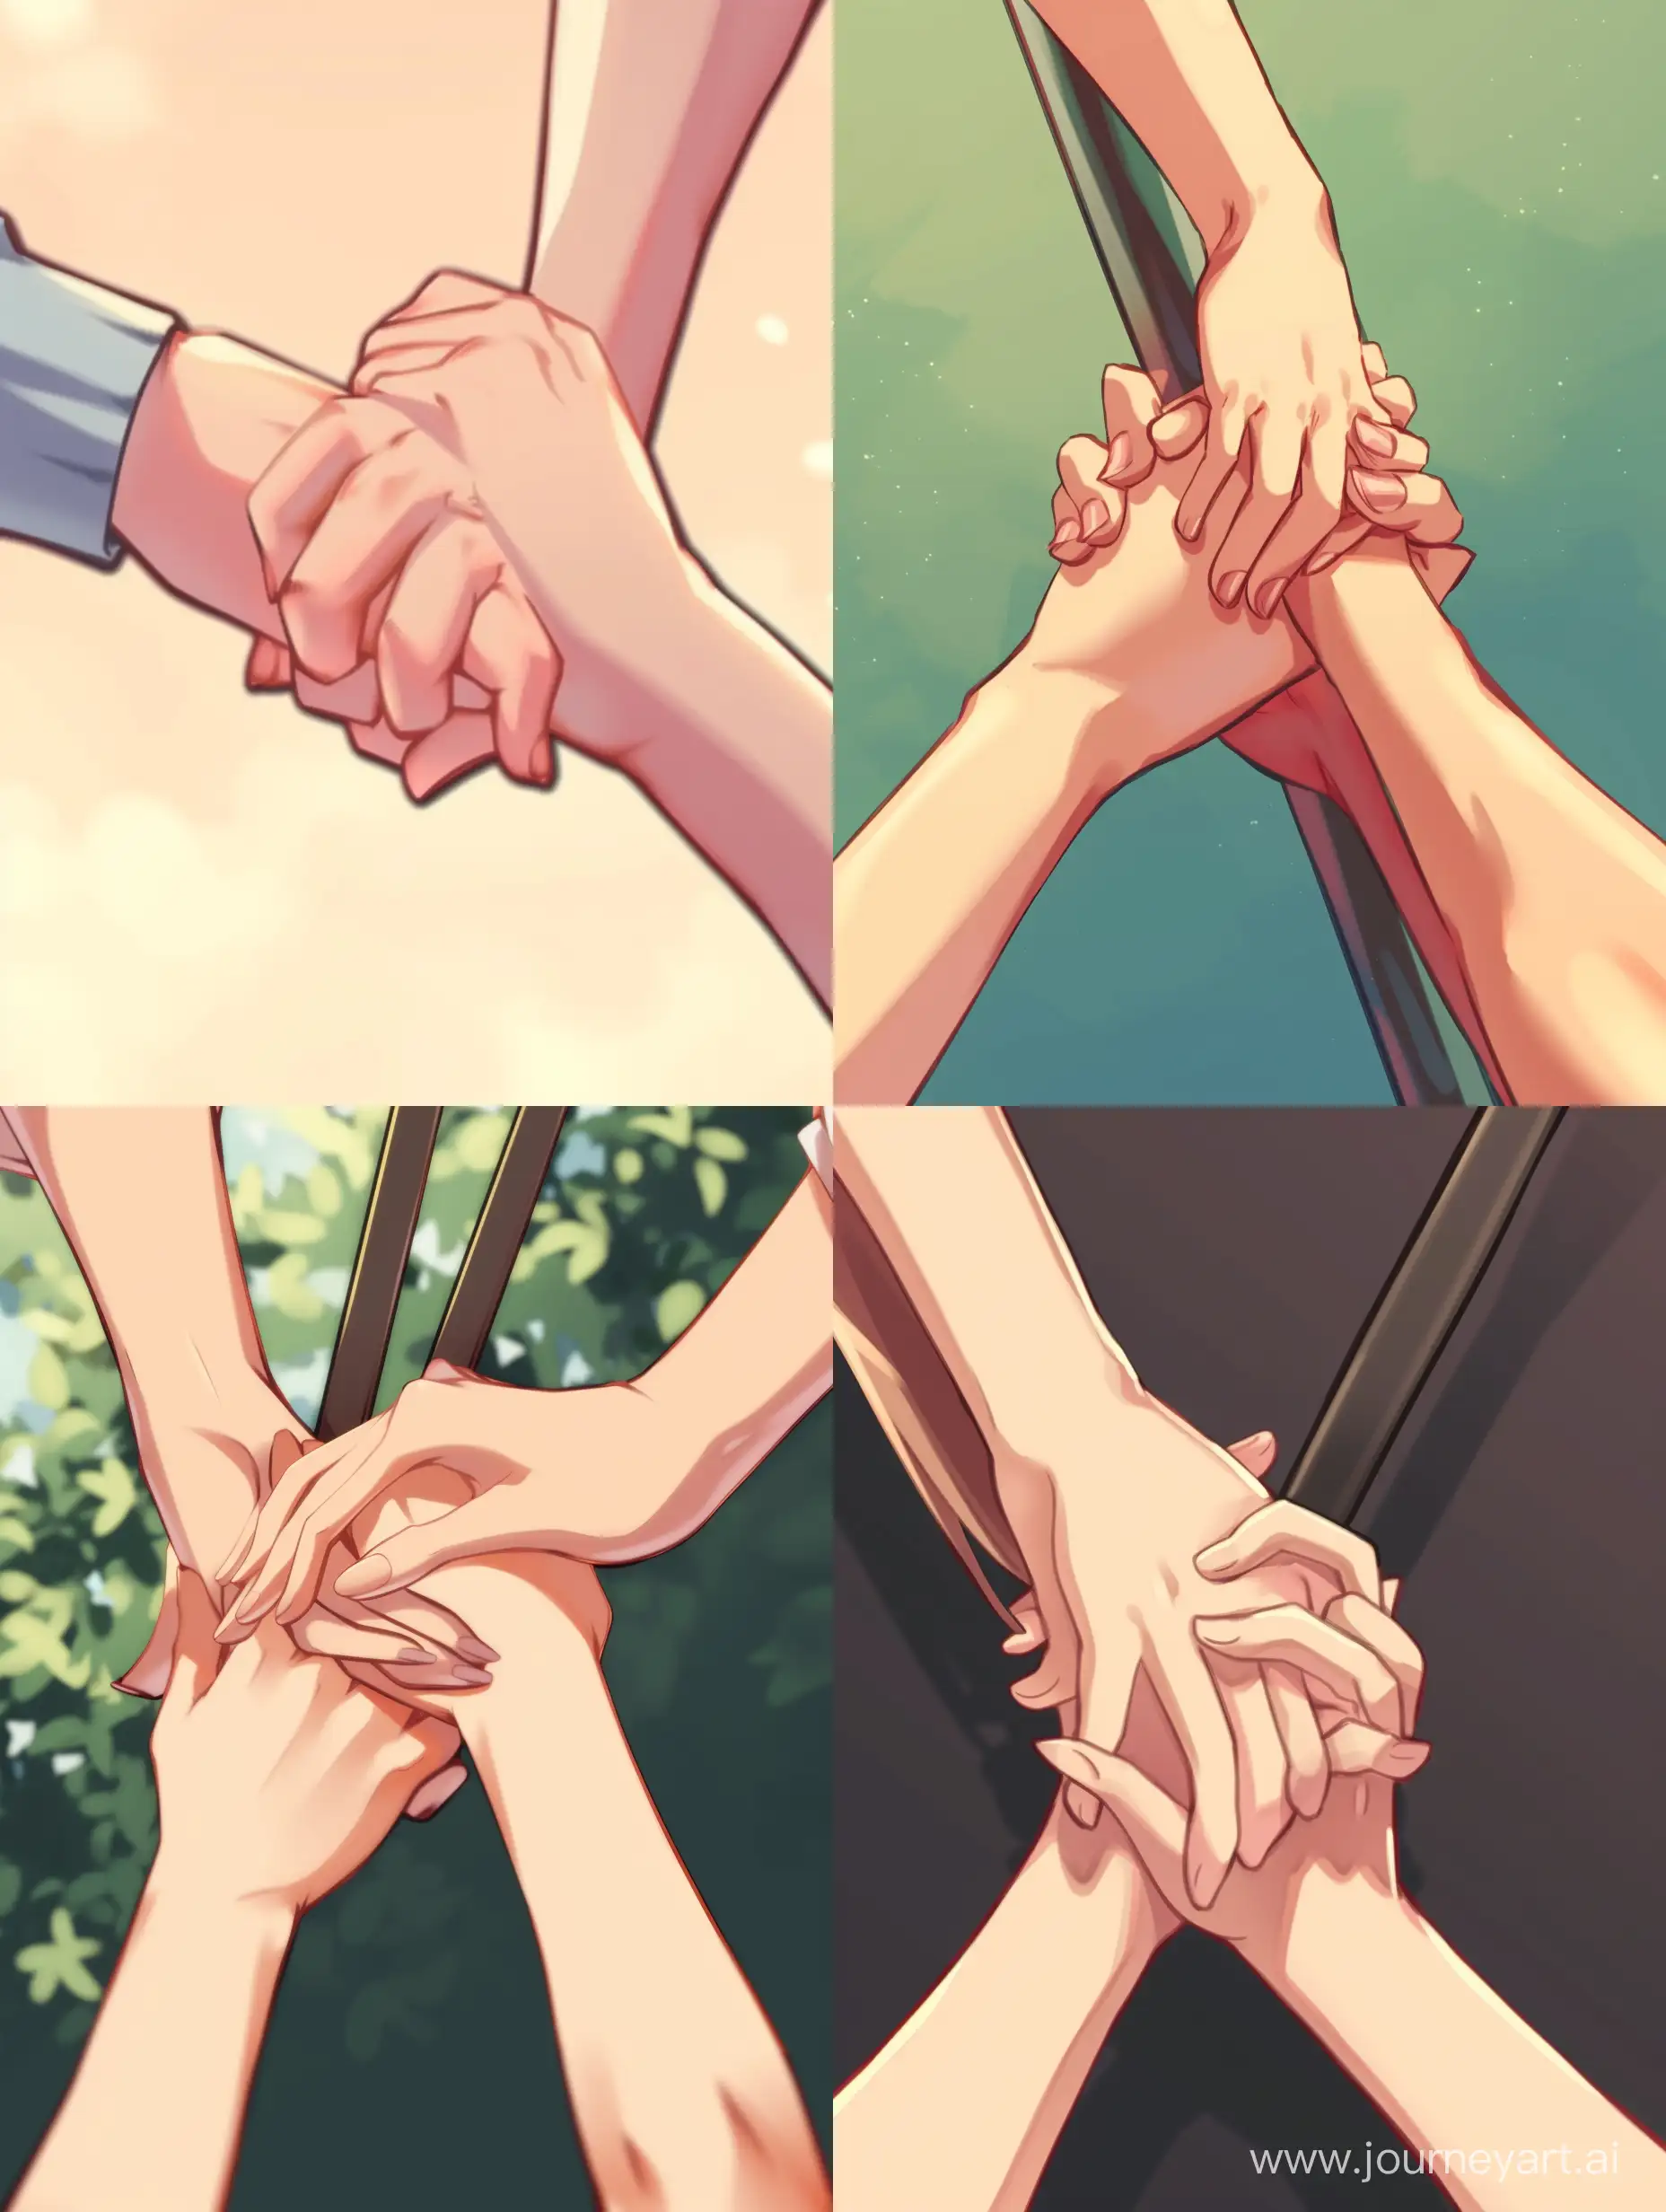 CloseUp-Anime-Style-Chibi-Hands-Holding-Together